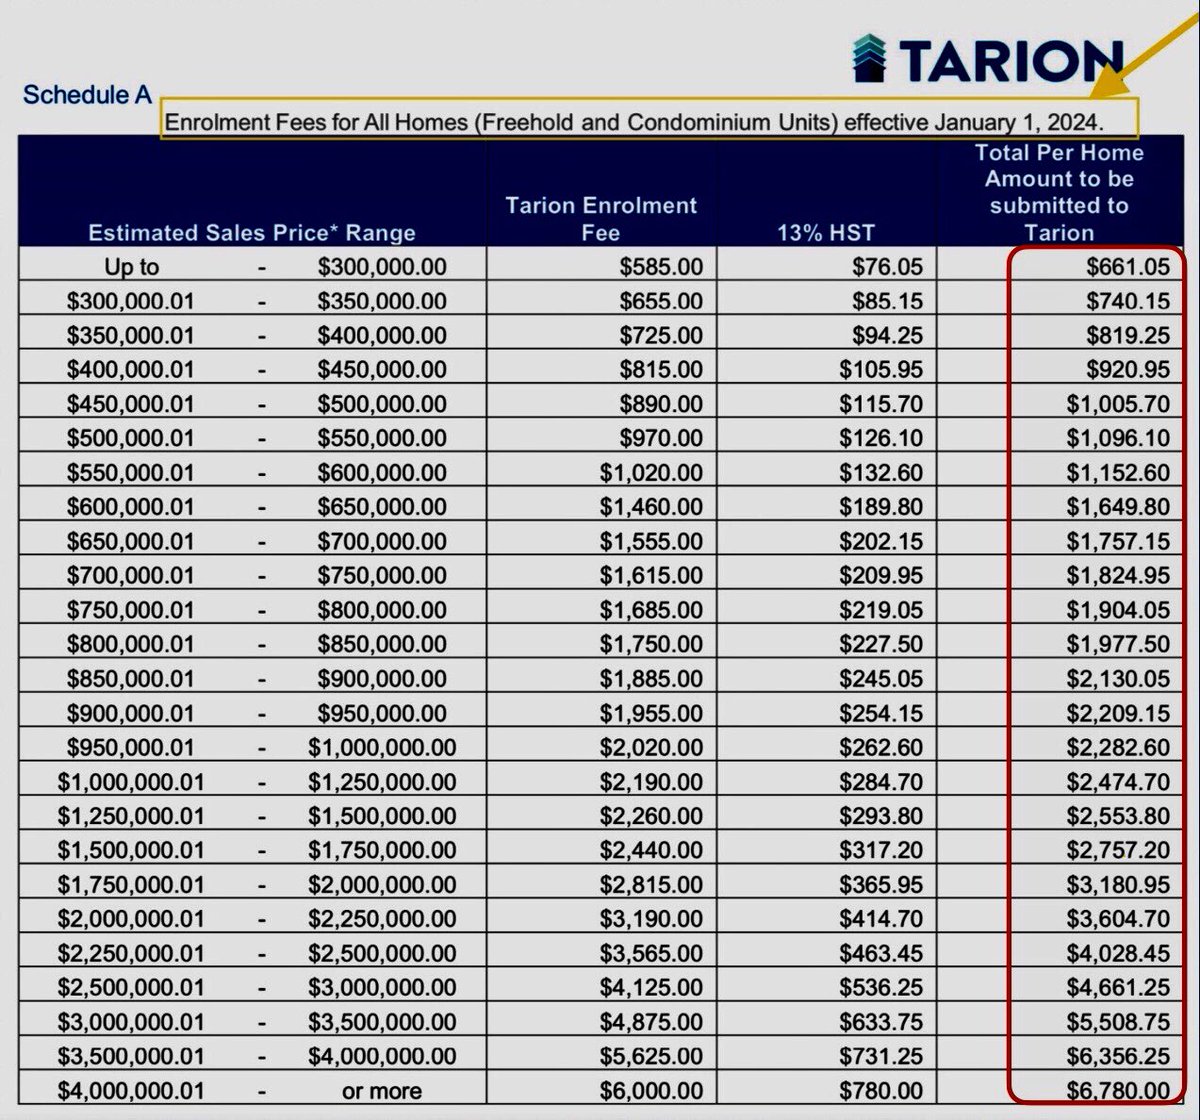 @ONTConsmrRights @deeb_nina Yes, this is the amount that BUYERS pay via the builder (vendo r) to Tarion. ⬇️ CEO @Tarion_ON is definitely muddying the waters to make it appear that’s it’s free for buyers. #BS #JustOneOfTheirLies